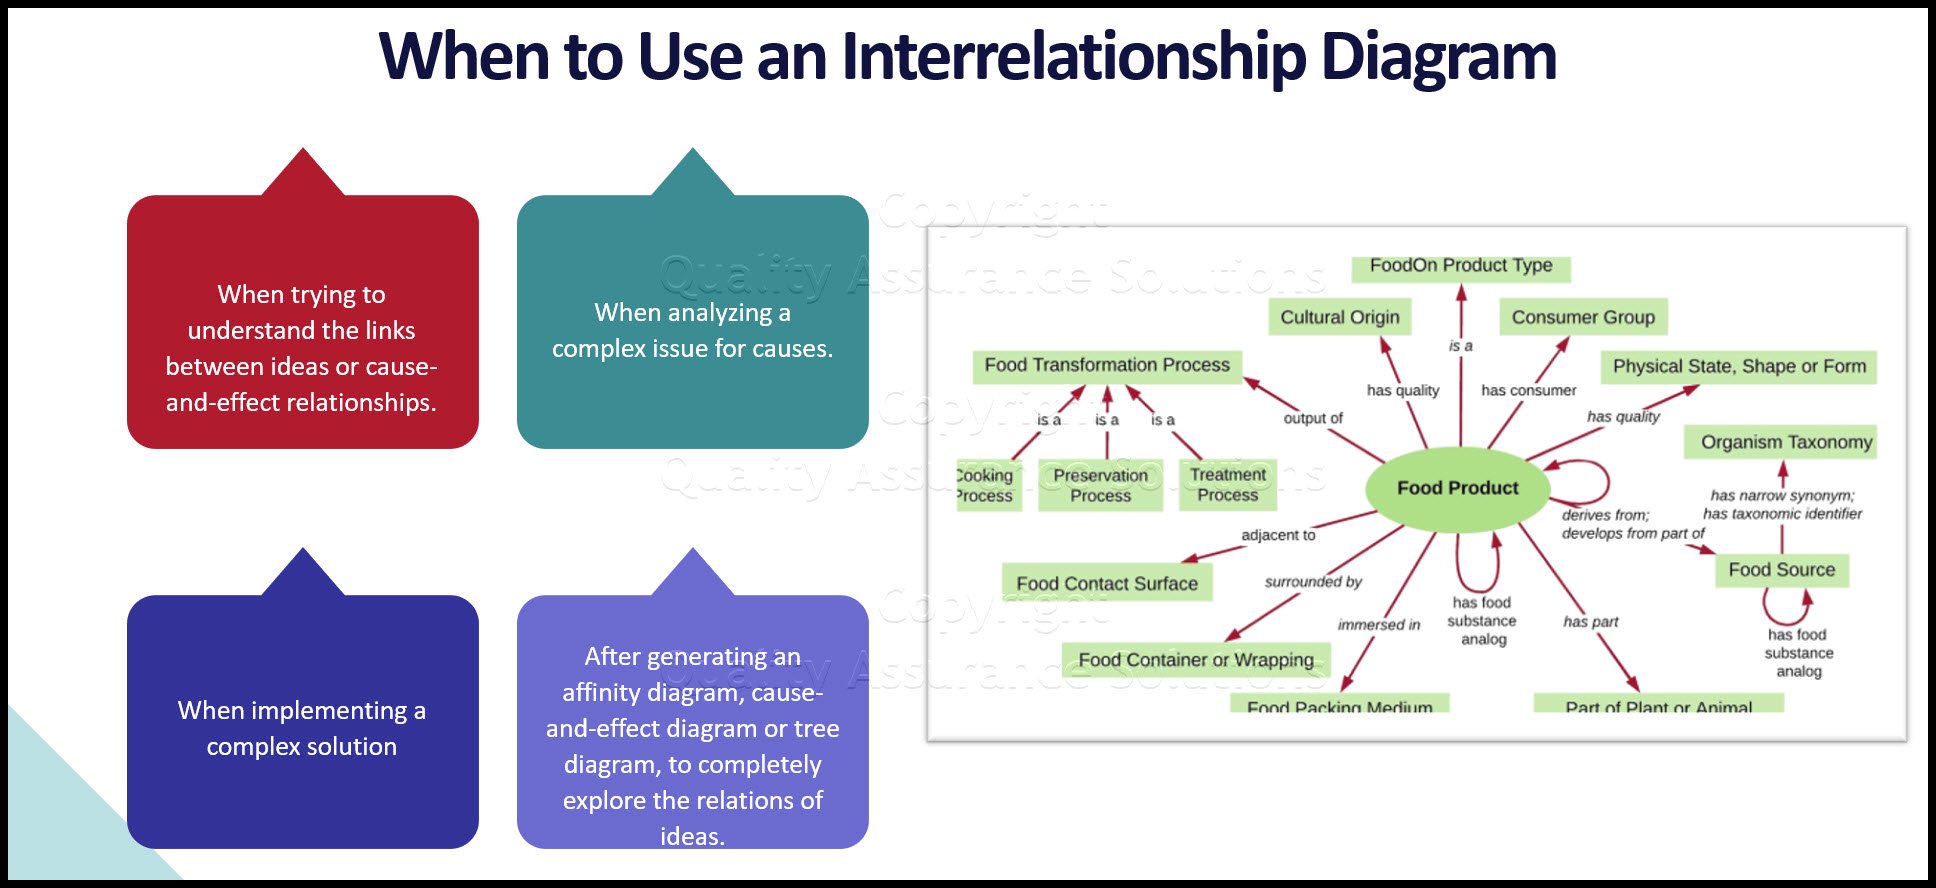 Learn the steps to create an interrelationship diagram. Article also provides insight on when to use it too. 